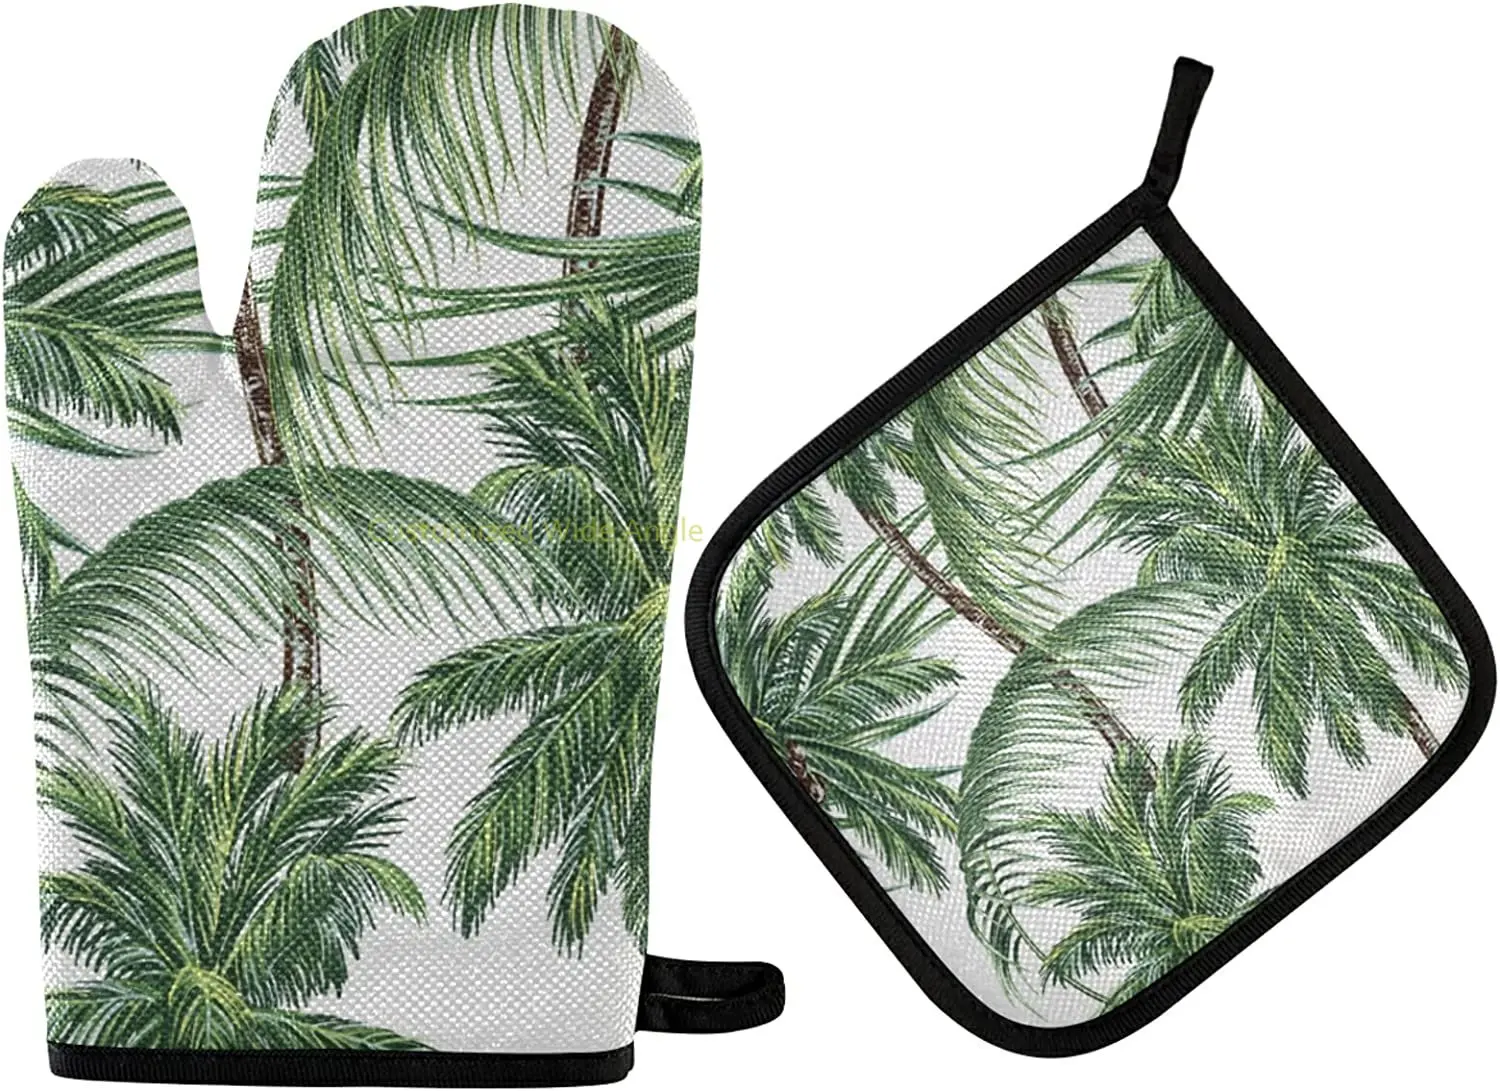 

Palm Tree Tropical Leaf Oven Mitts and Pot Holders Insulated Gloves & Kitchen Counter Safe Mats for Cooking BBQ Baking Grilling